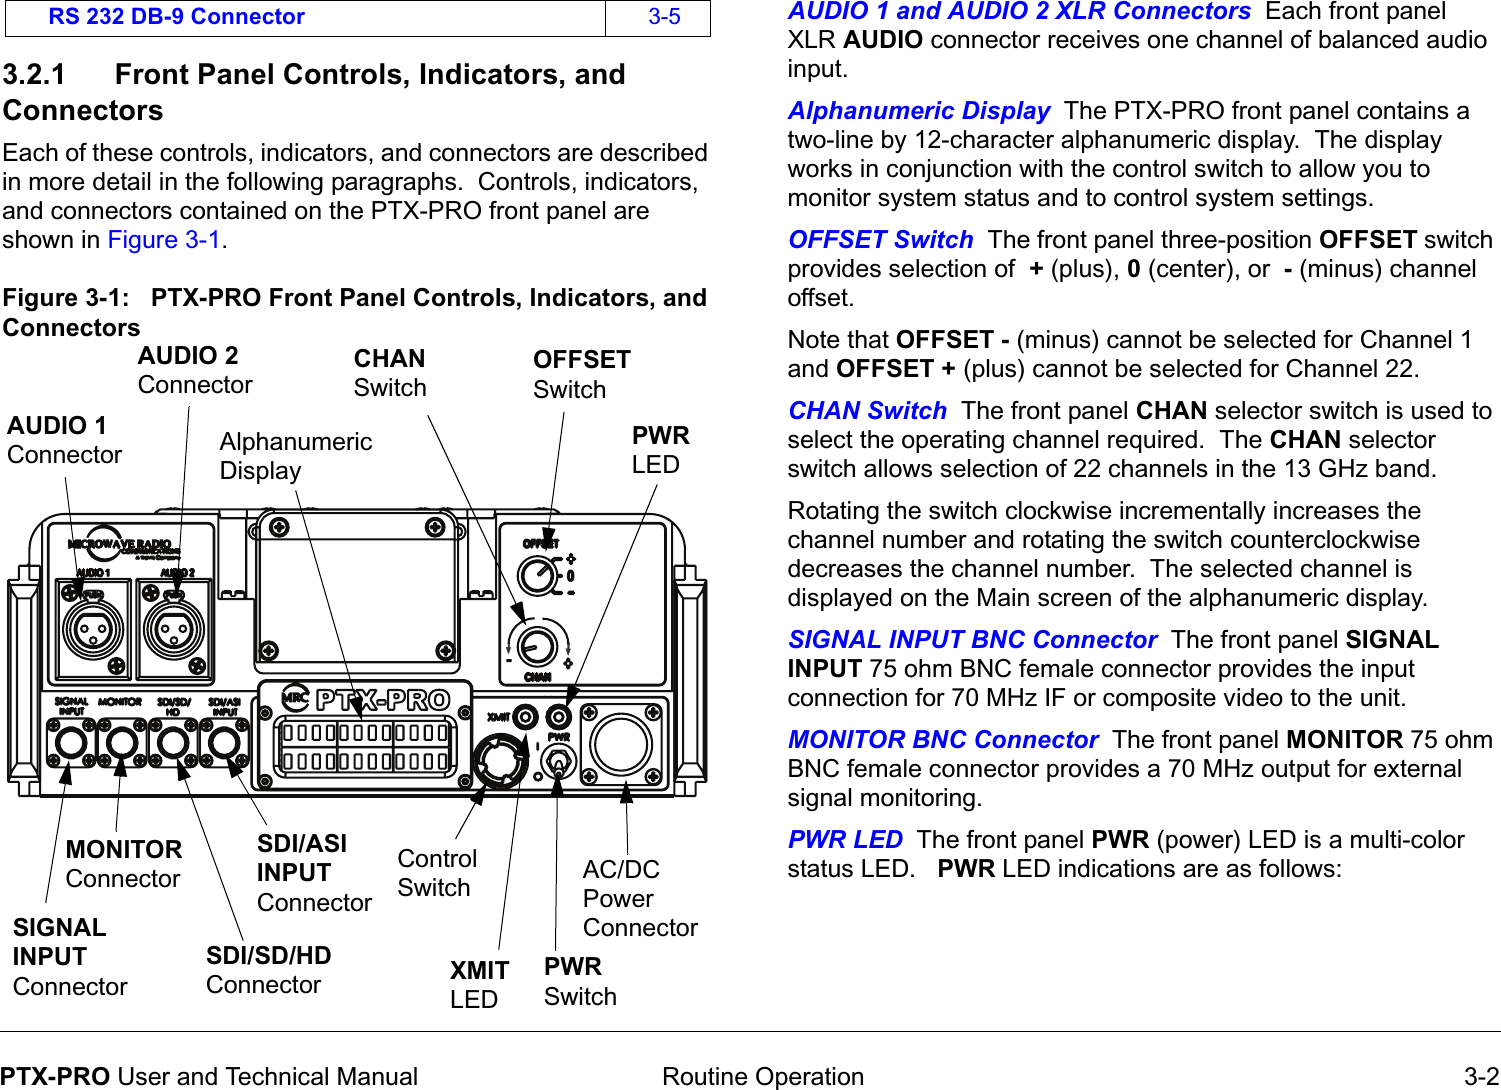  Routine Operation 3-2PTX-PRO User and Technical Manual3.2.1 Front Panel Controls, Indicators, and ConnectorsEach of these controls, indicators, and connectors are described in more detail in the following paragraphs.  Controls, indicators, and connectors contained on the PTX-PRO front panel are shown in Figure 3-1.  Figure 3-1:   PTX-PRO Front Panel Controls, Indicators, and ConnectorsRS 232 DB-9 Connector 3-5AUDIO 2 ConnectorAUDIO 1 ConnectorCHAN SwitchOFFSET SwitchAlphanumeric DisplayMONITOR ConnectorSIGNAL INPUT ConnectorSDI/ASI INPUT ConnectorAC/DC Power ConnectorPWR SwitchPWR LEDXMIT LEDControl SwitchSDI/SD/HD ConnectorAUDIO 1 and AUDIO 2 XLR Connectors  Each front panel XLR AUDIO connector receives one channel of balanced audio input.Alphanumeric Display  The PTX-PRO front panel contains a two-line by 12-character alphanumeric display.  The display works in conjunction with the control switch to allow you to monitor system status and to control system settings. OFFSET Switch  The front panel three-position OFFSET switch provides selection of  + (plus), 0 (center), or  - (minus) channel offset.  Note that OFFSET - (minus) cannot be selected for Channel 1 and OFFSET + (plus) cannot be selected for Channel 22.CHAN Switch  The front panel CHAN selector switch is used to select the operating channel required.  The CHAN selector switch allows selection of 22 channels in the 13 GHz band.   Rotating the switch clockwise incrementally increases the channel number and rotating the switch counterclockwise decreases the channel number.  The selected channel is displayed on the Main screen of the alphanumeric display.SIGNAL INPUT BNC Connector  The front panel SIGNAL INPUT 75 ohm BNC female connector provides the input connection for 70 MHz IF or composite video to the unit.MONITOR BNC Connector  The front panel MONITOR 75 ohm BNC female connector provides a 70 MHz output for external signal monitoring.PWR LED  The front panel PWR (power) LED is a multi-color status LED.   PWR LED indications are as follows: